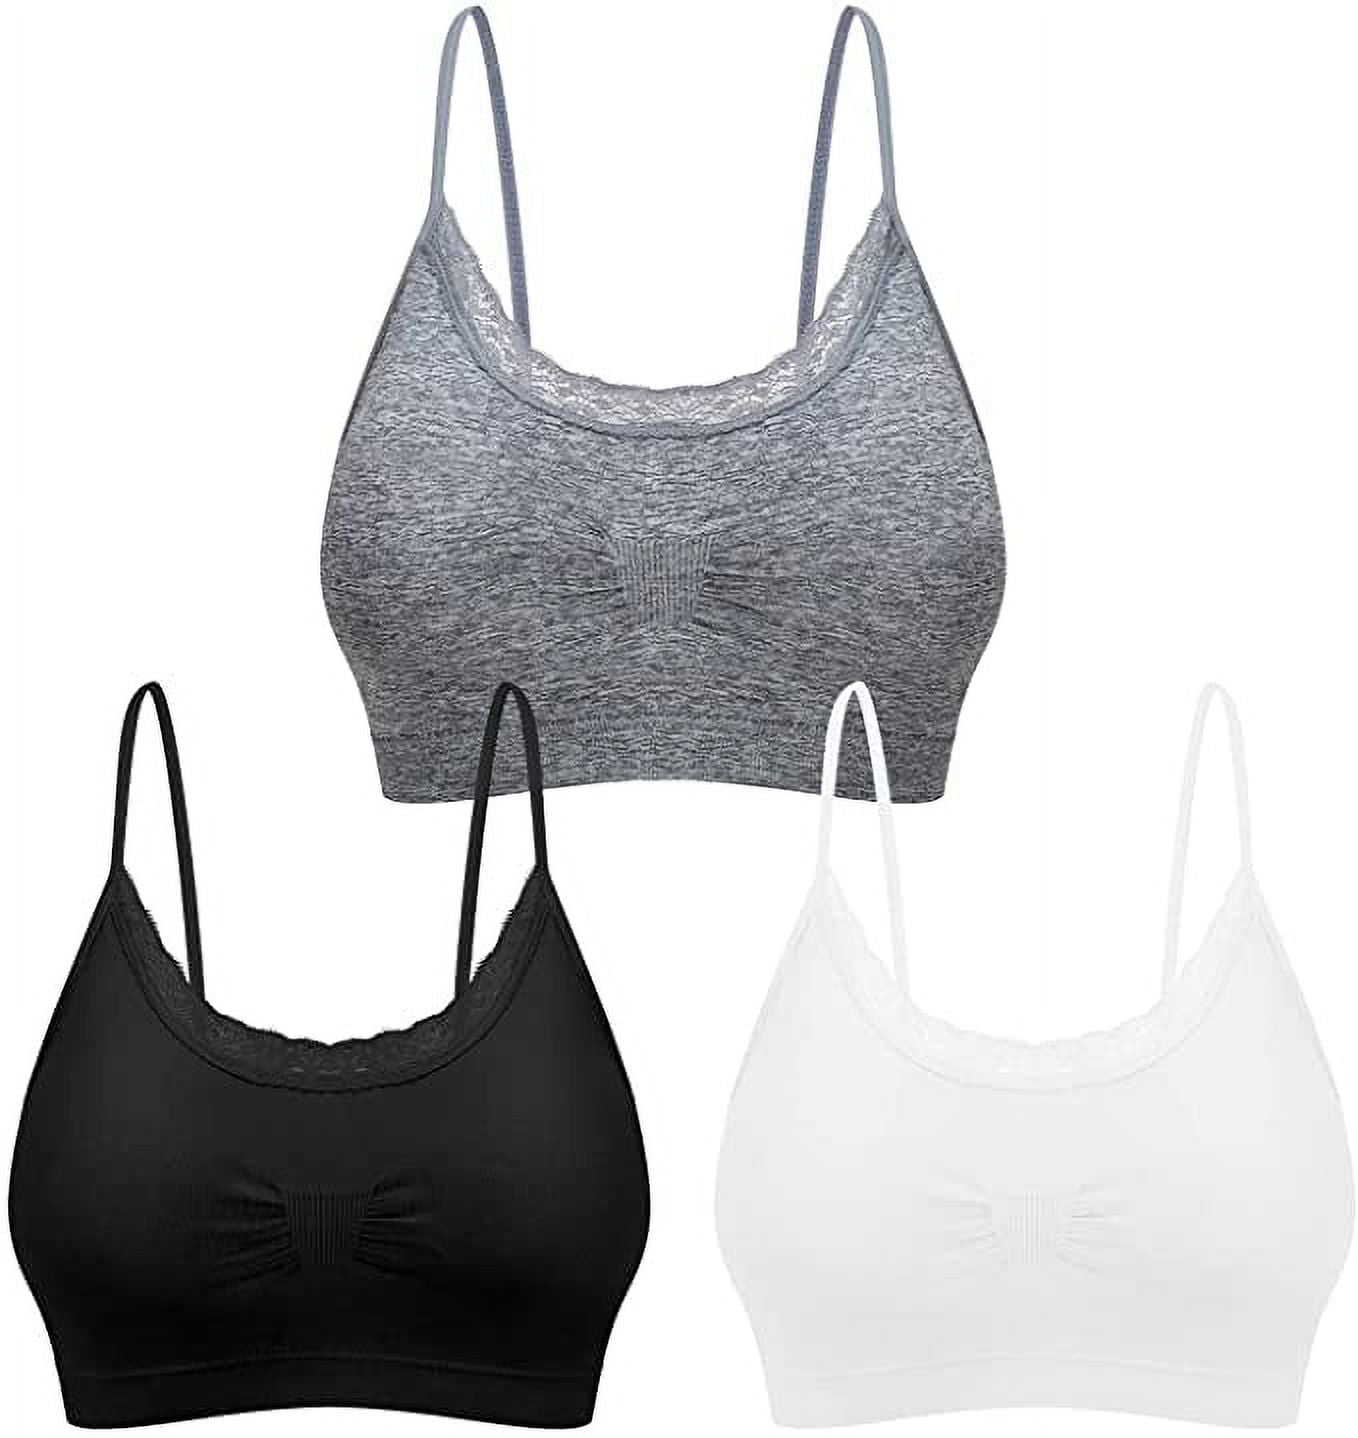 Fashion 3pack Floral Lace Wireless Bralettes Bra Removable Padded Camisole  Bras @ Best Price Online